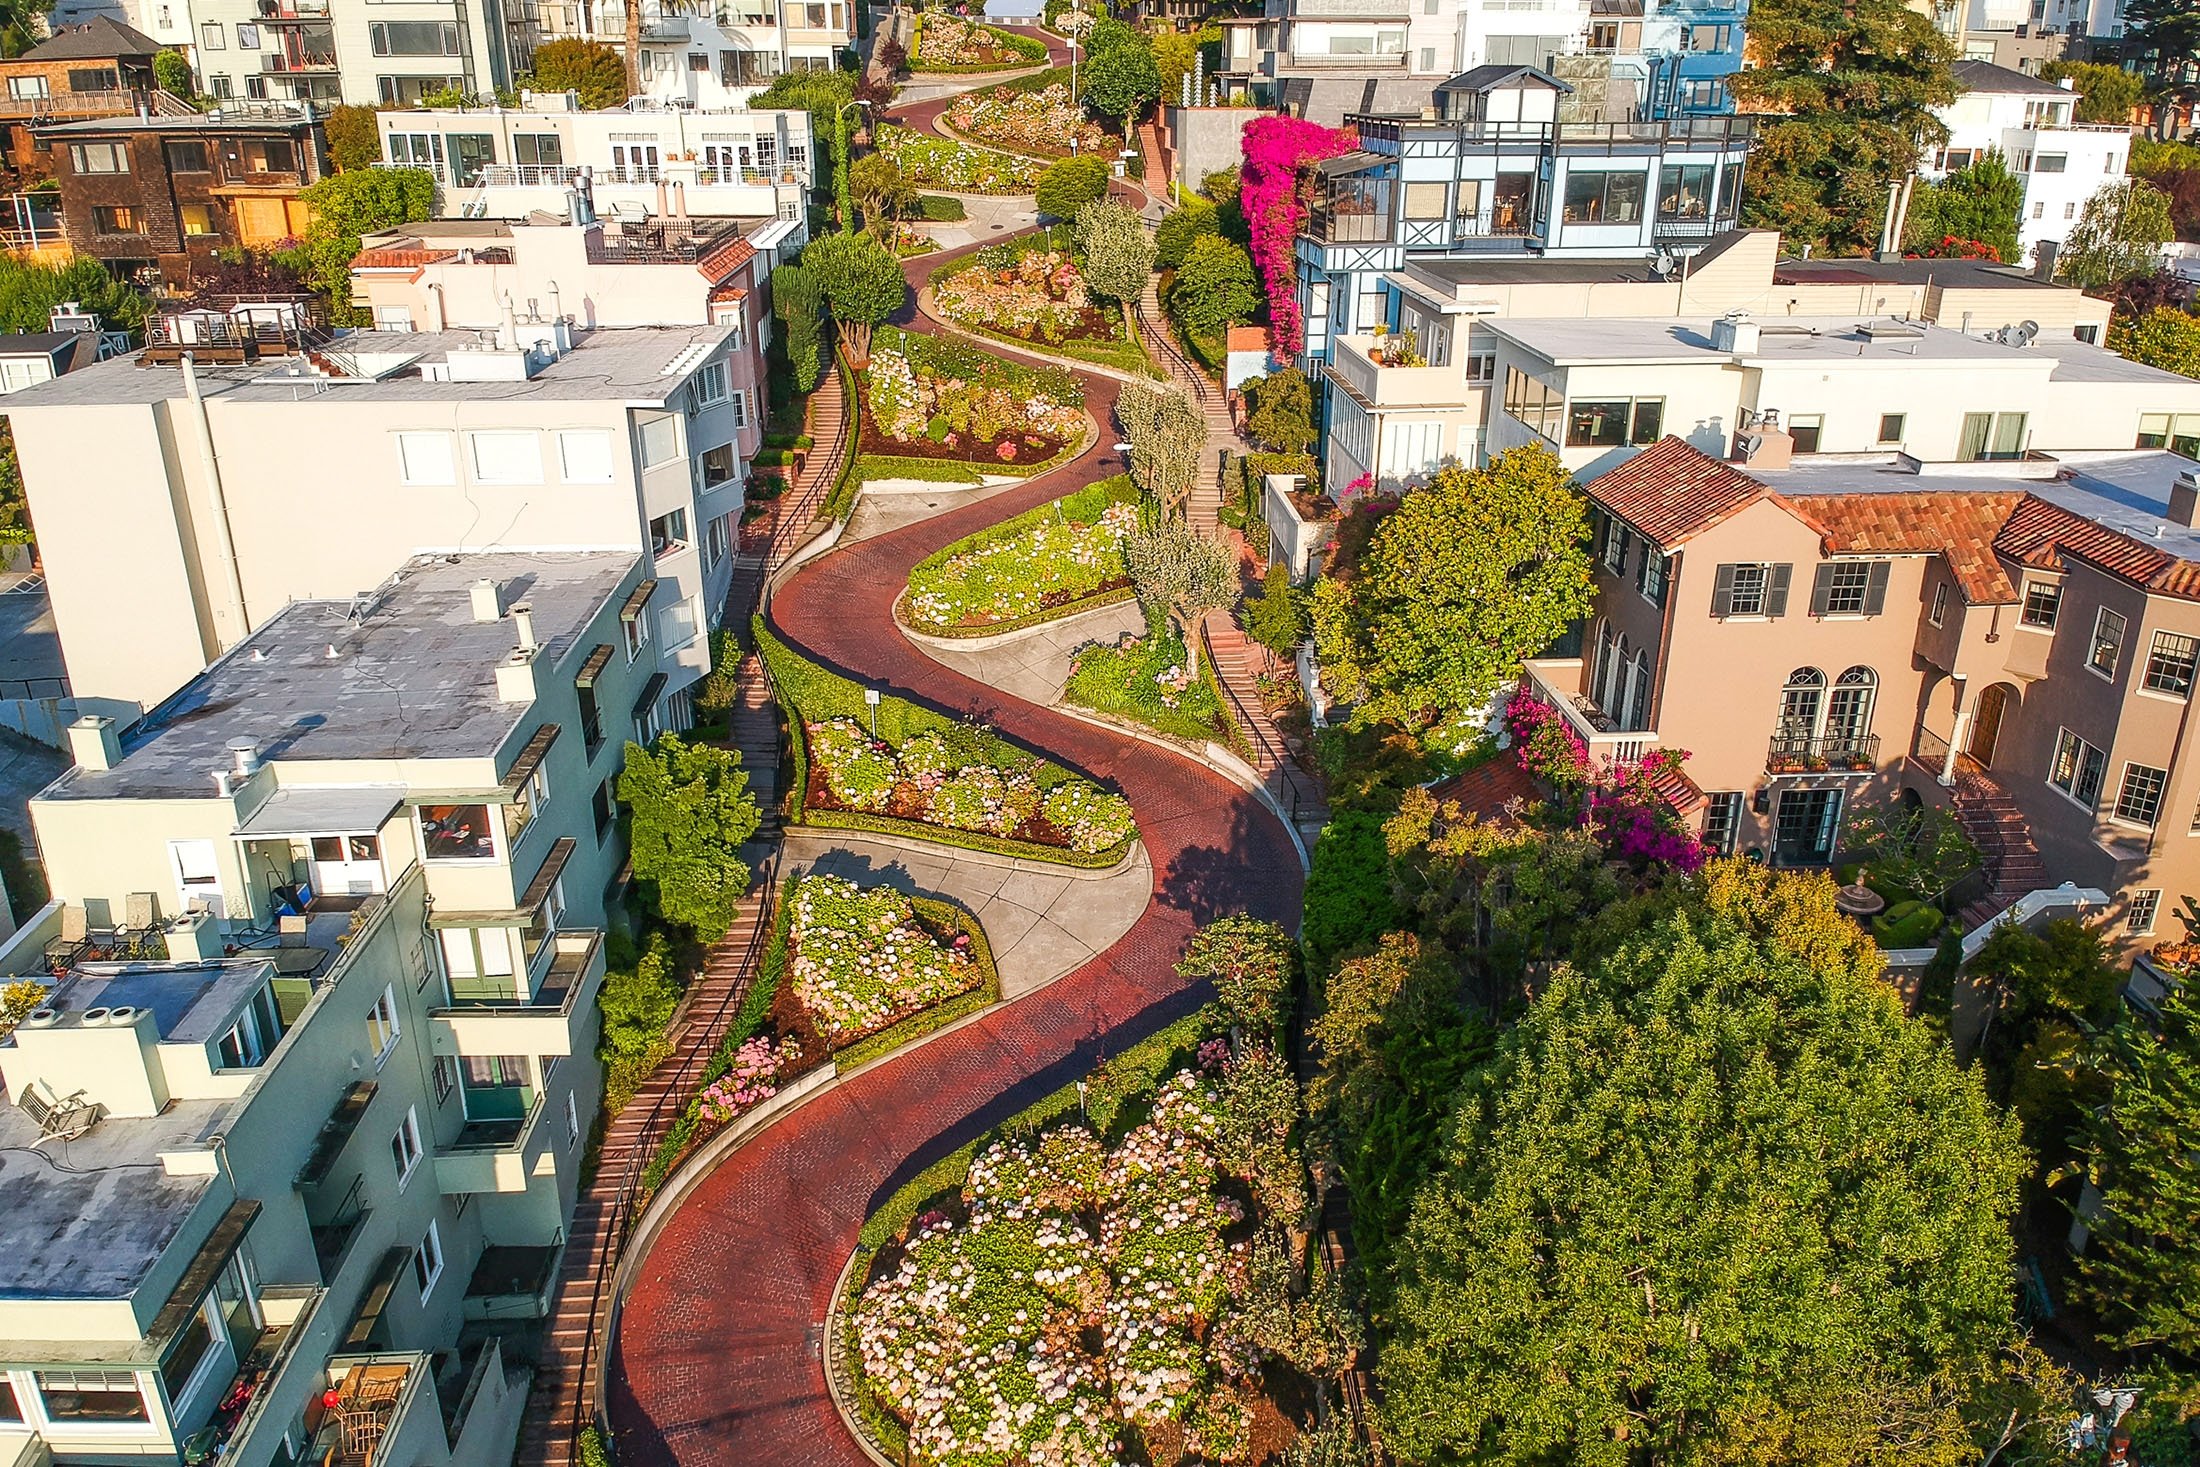 Lombard Street is a street in San Francisco, California, famous for its sharp turns.  (Photo Shutterstock)